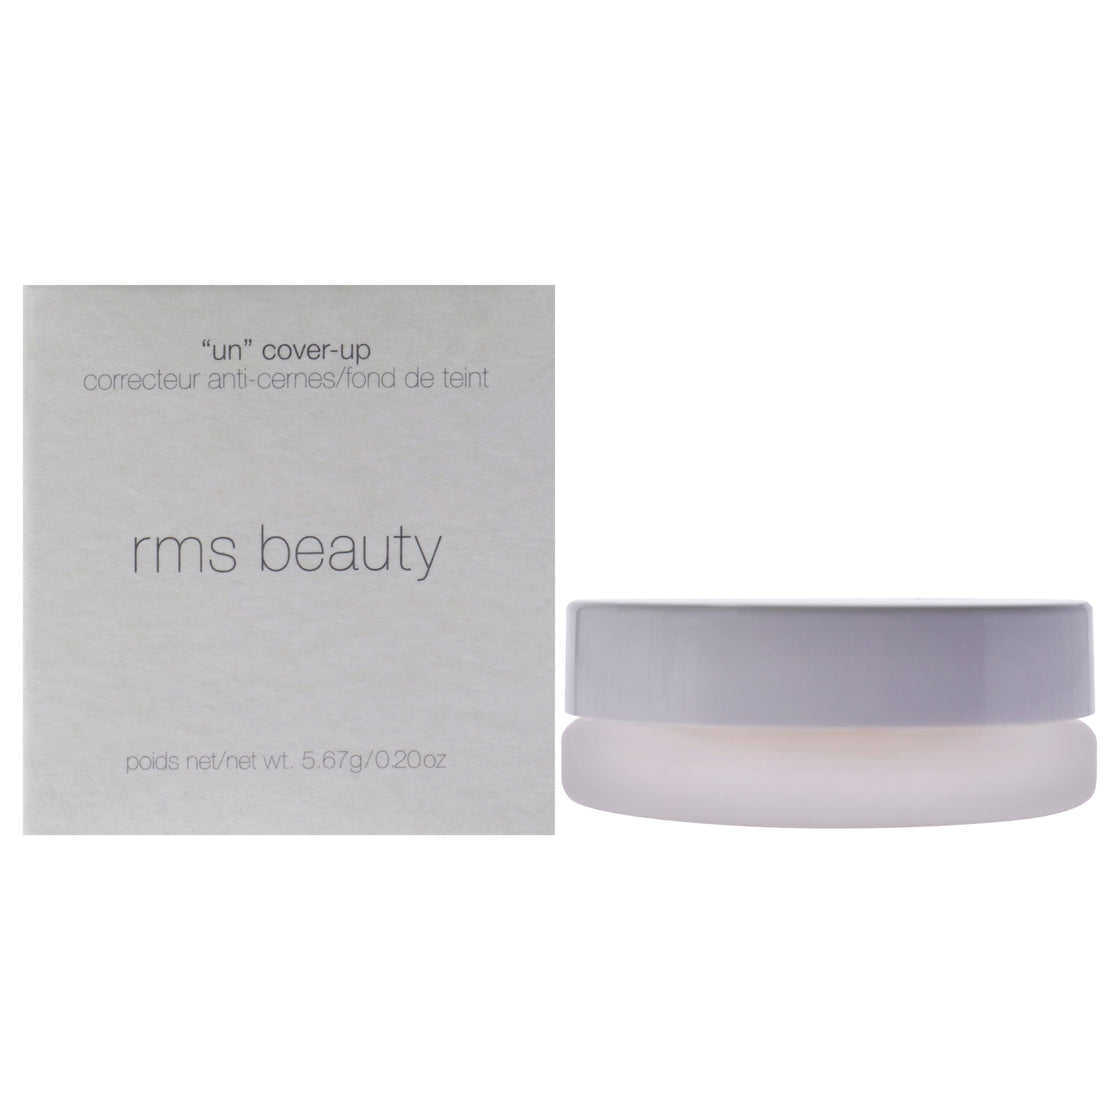 UN Cover-Up Concealer - 000 Snow Whites by RMS Beauty for Women - 0.20 oz Concealer